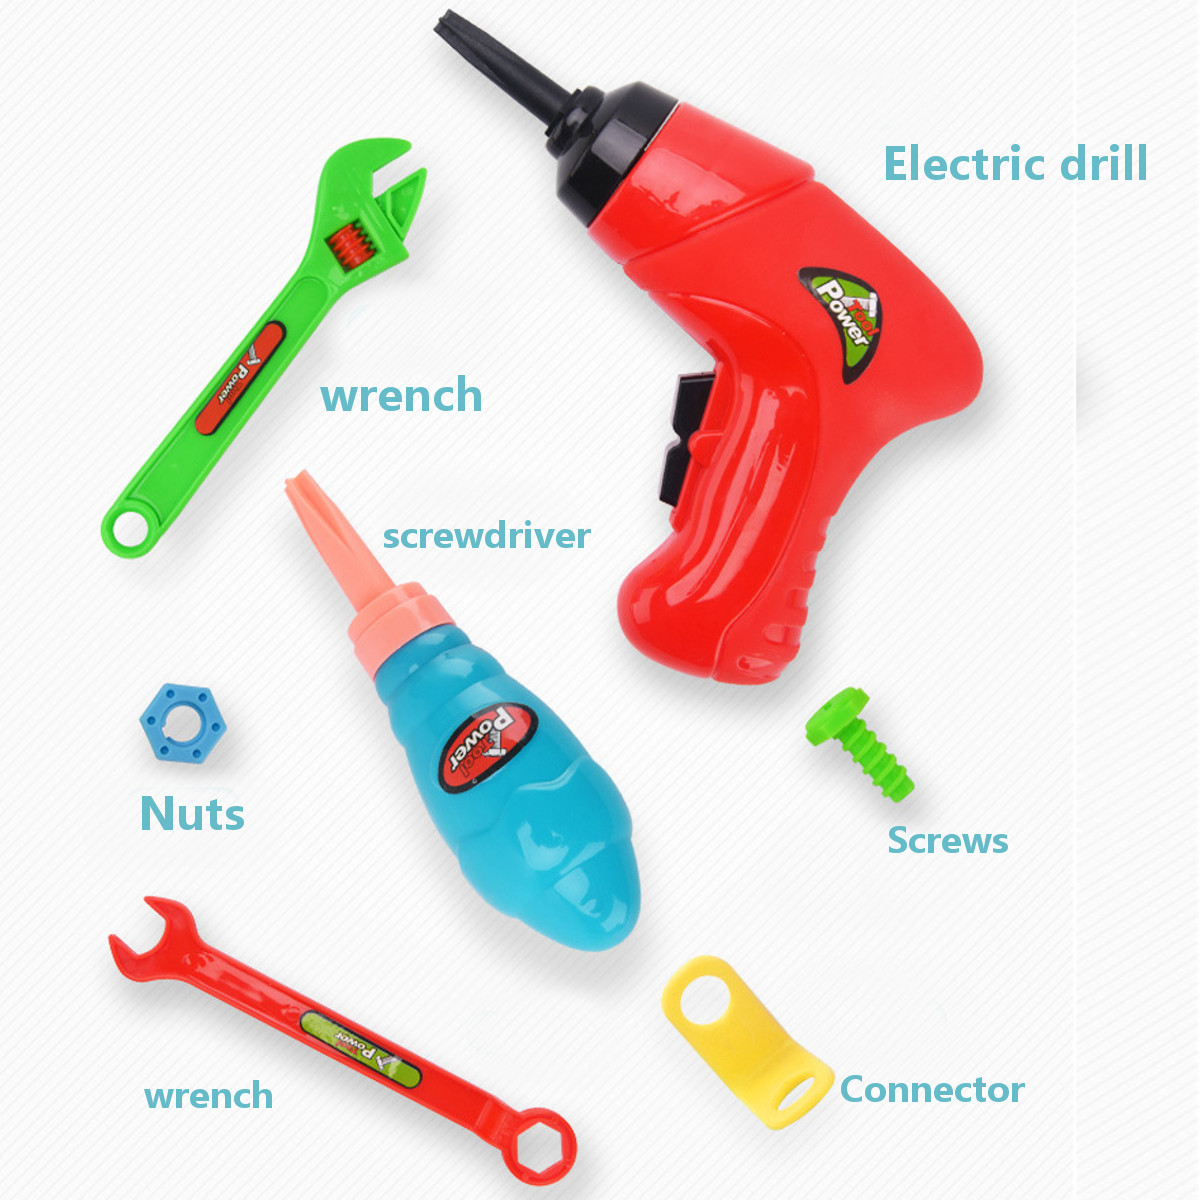 211PCS-DIY-Electric-Drill-Screwdriver-Toys-Nut-Disassembly-3D-Puzzle-Kids-Educational-Toys-Gift-1740223-3